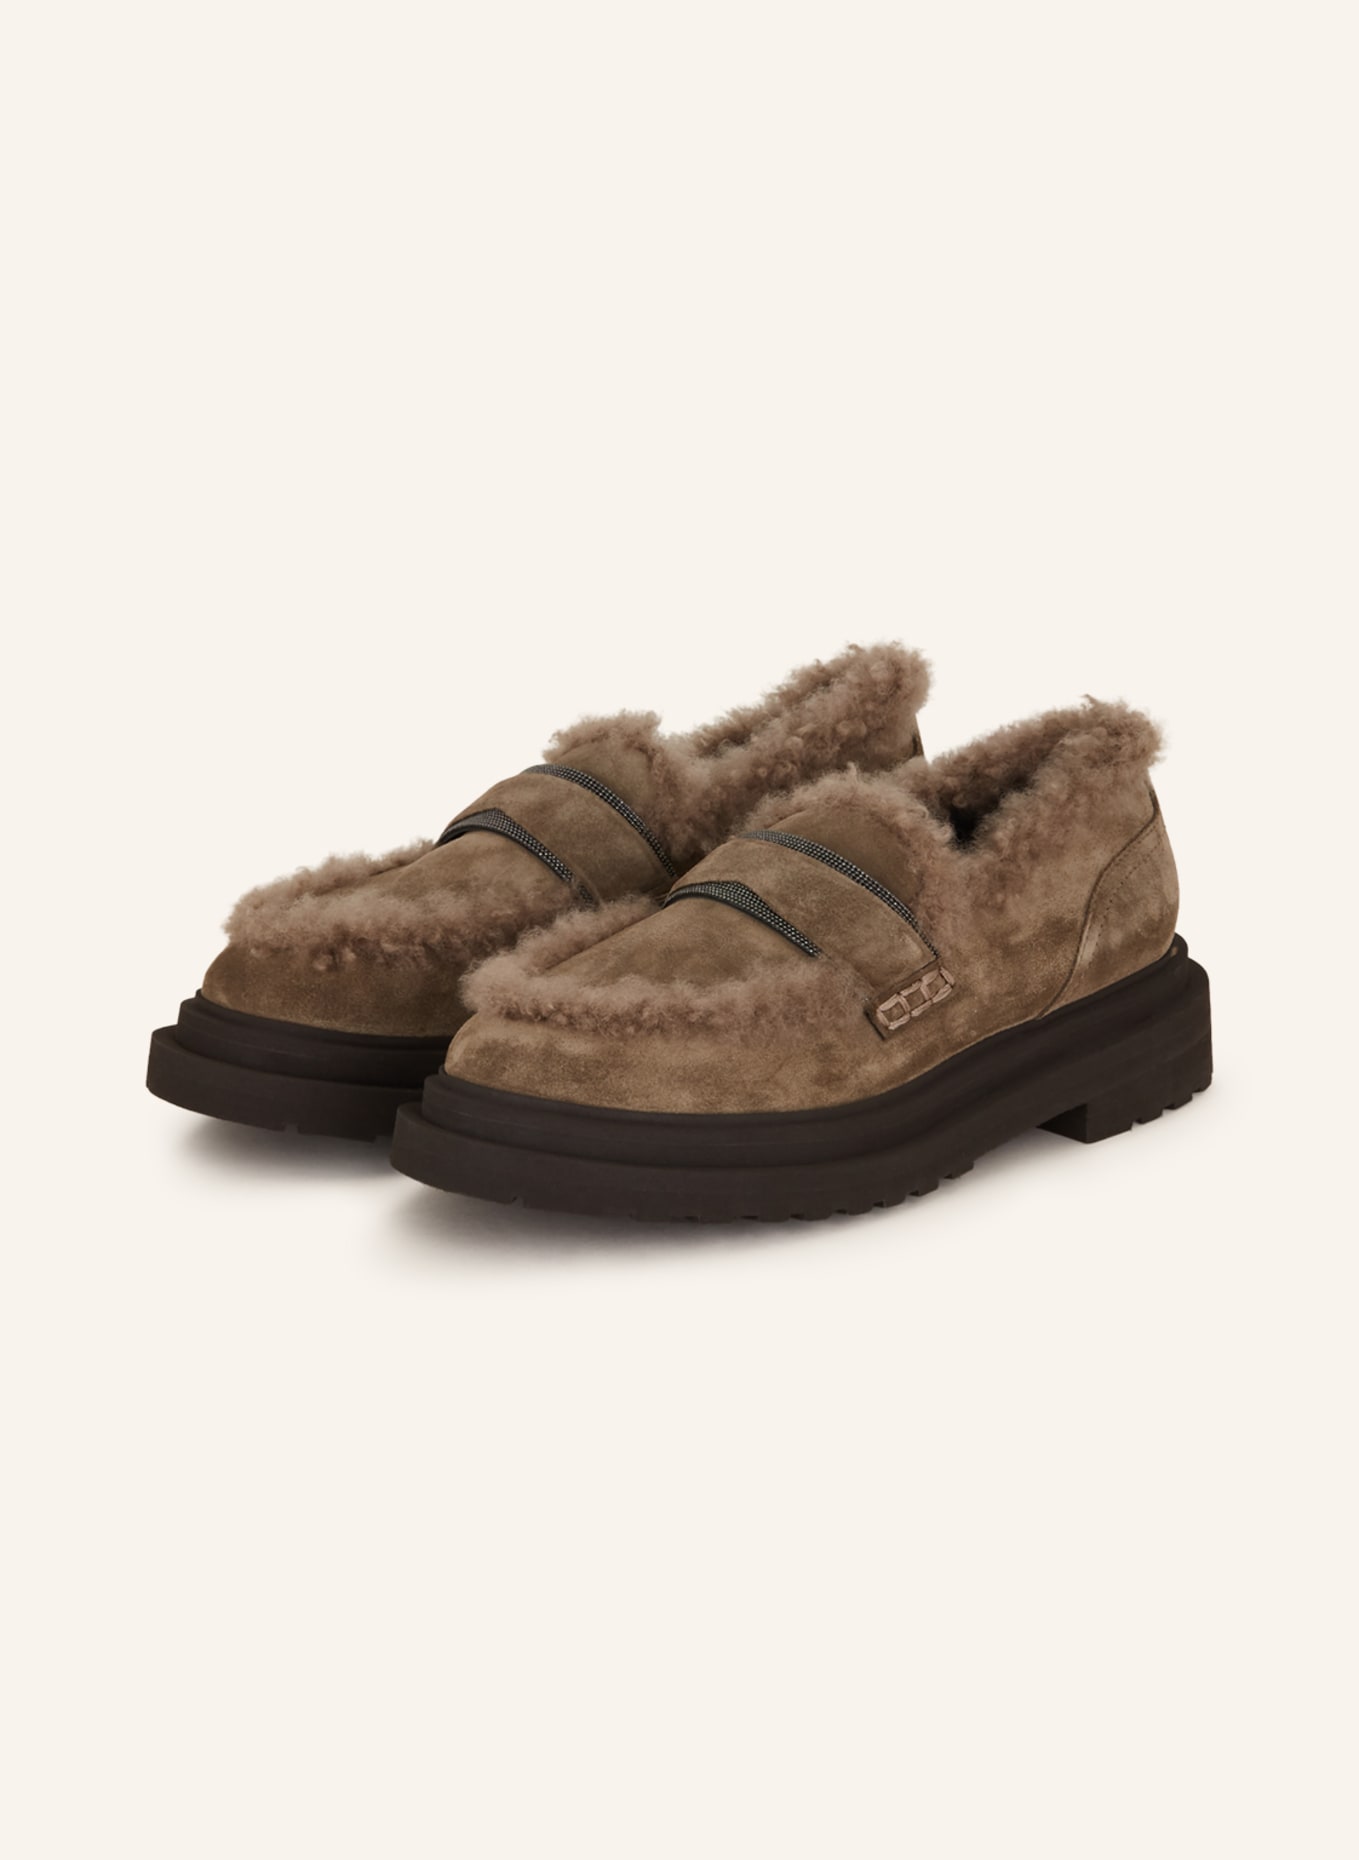 BRUNELLO CUCINELLI Penny loafers with sheepskin, Color: TAUPE (Image 1)